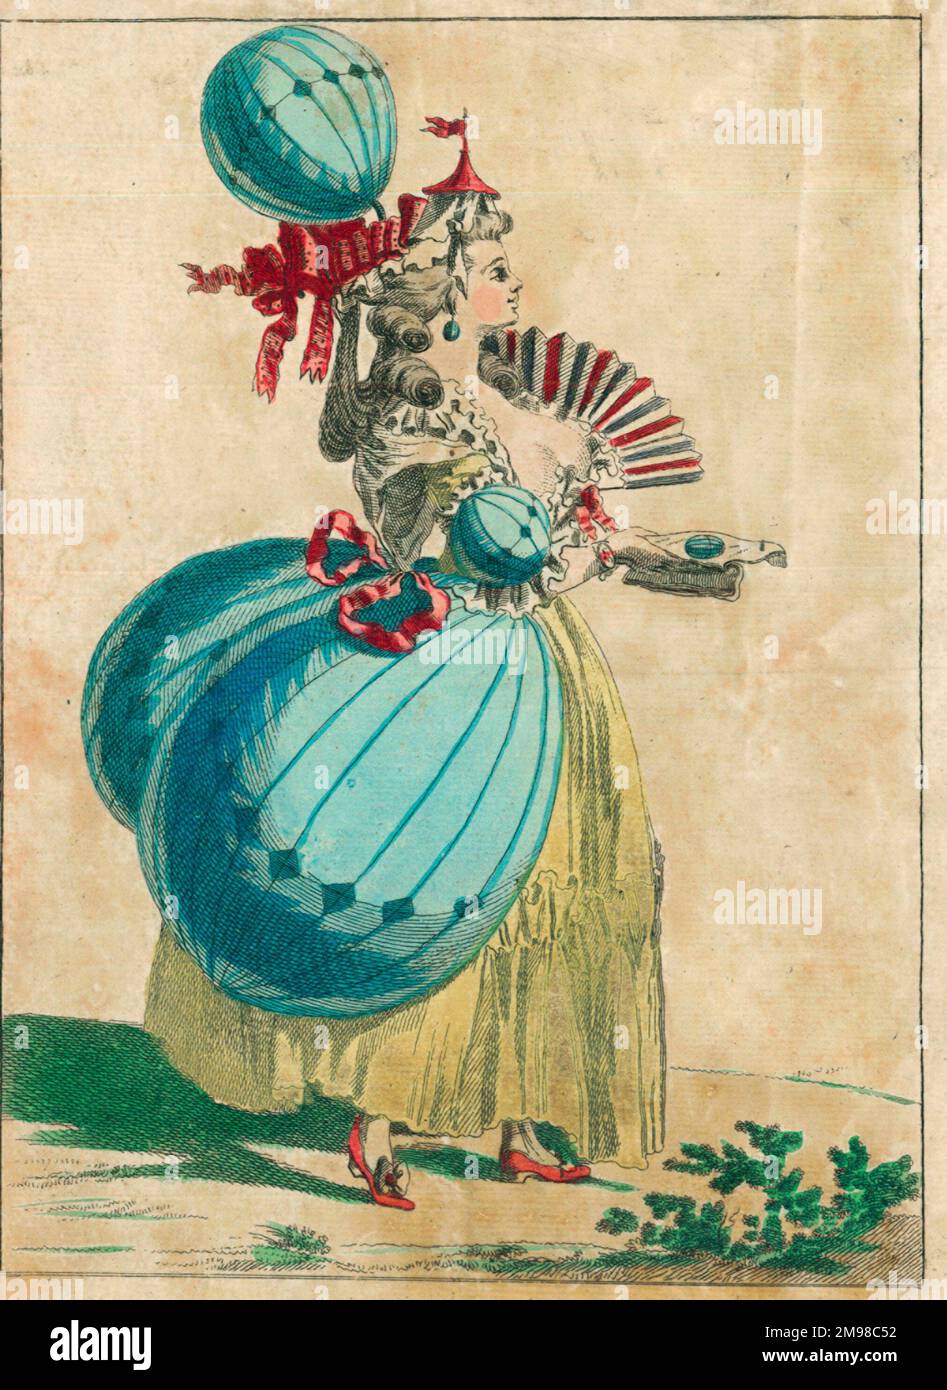 A pair of late 18th century French lithographs which reflect the 'balloon mania' which swept across Europe at the time of the first balloon ascents, with the fashionable lady and gentleman incorporating inflated balloon designs in their costumes (hats, dress, arm cuffs etc.) (1/2). Stock Photo